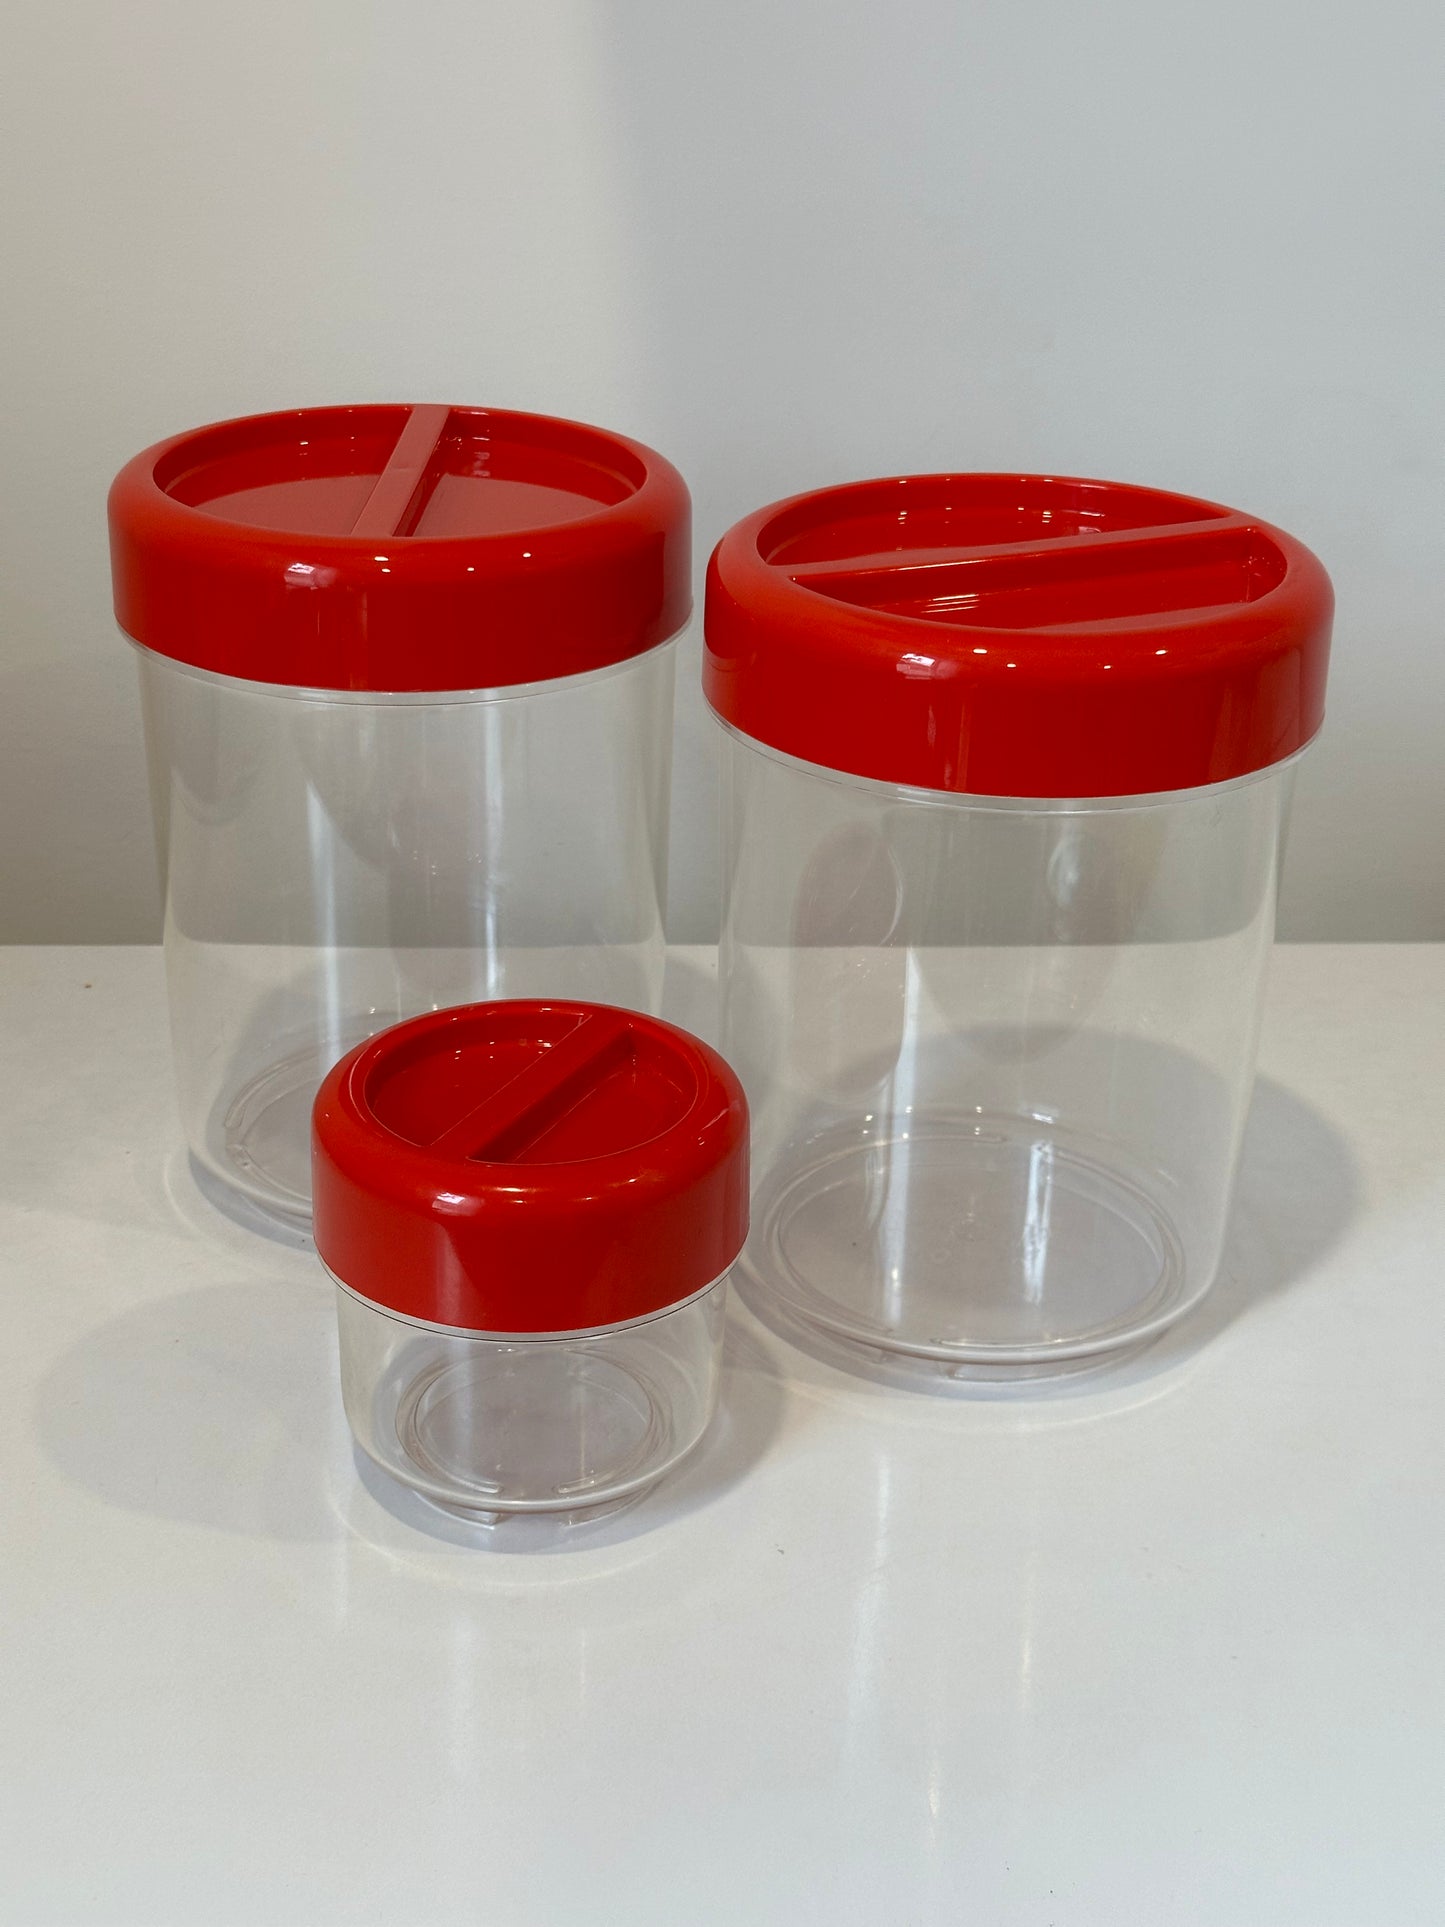 Vintage André Morin containers